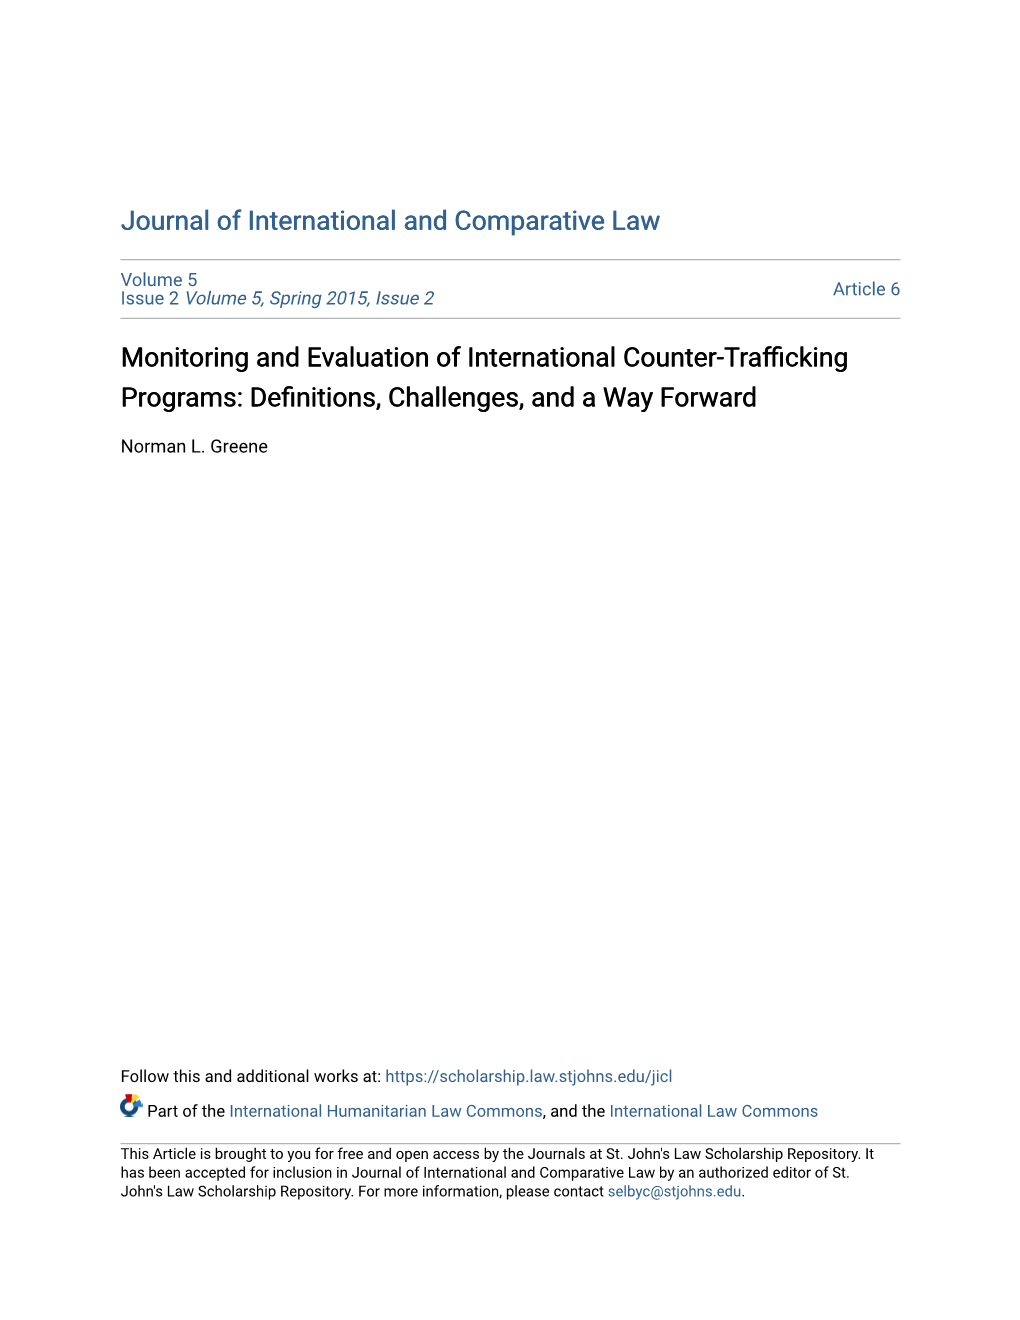 Monitoring and Evaluation of International Counter-Trafficking Programs: Definitions, Challenges, and a Aw Y Forward